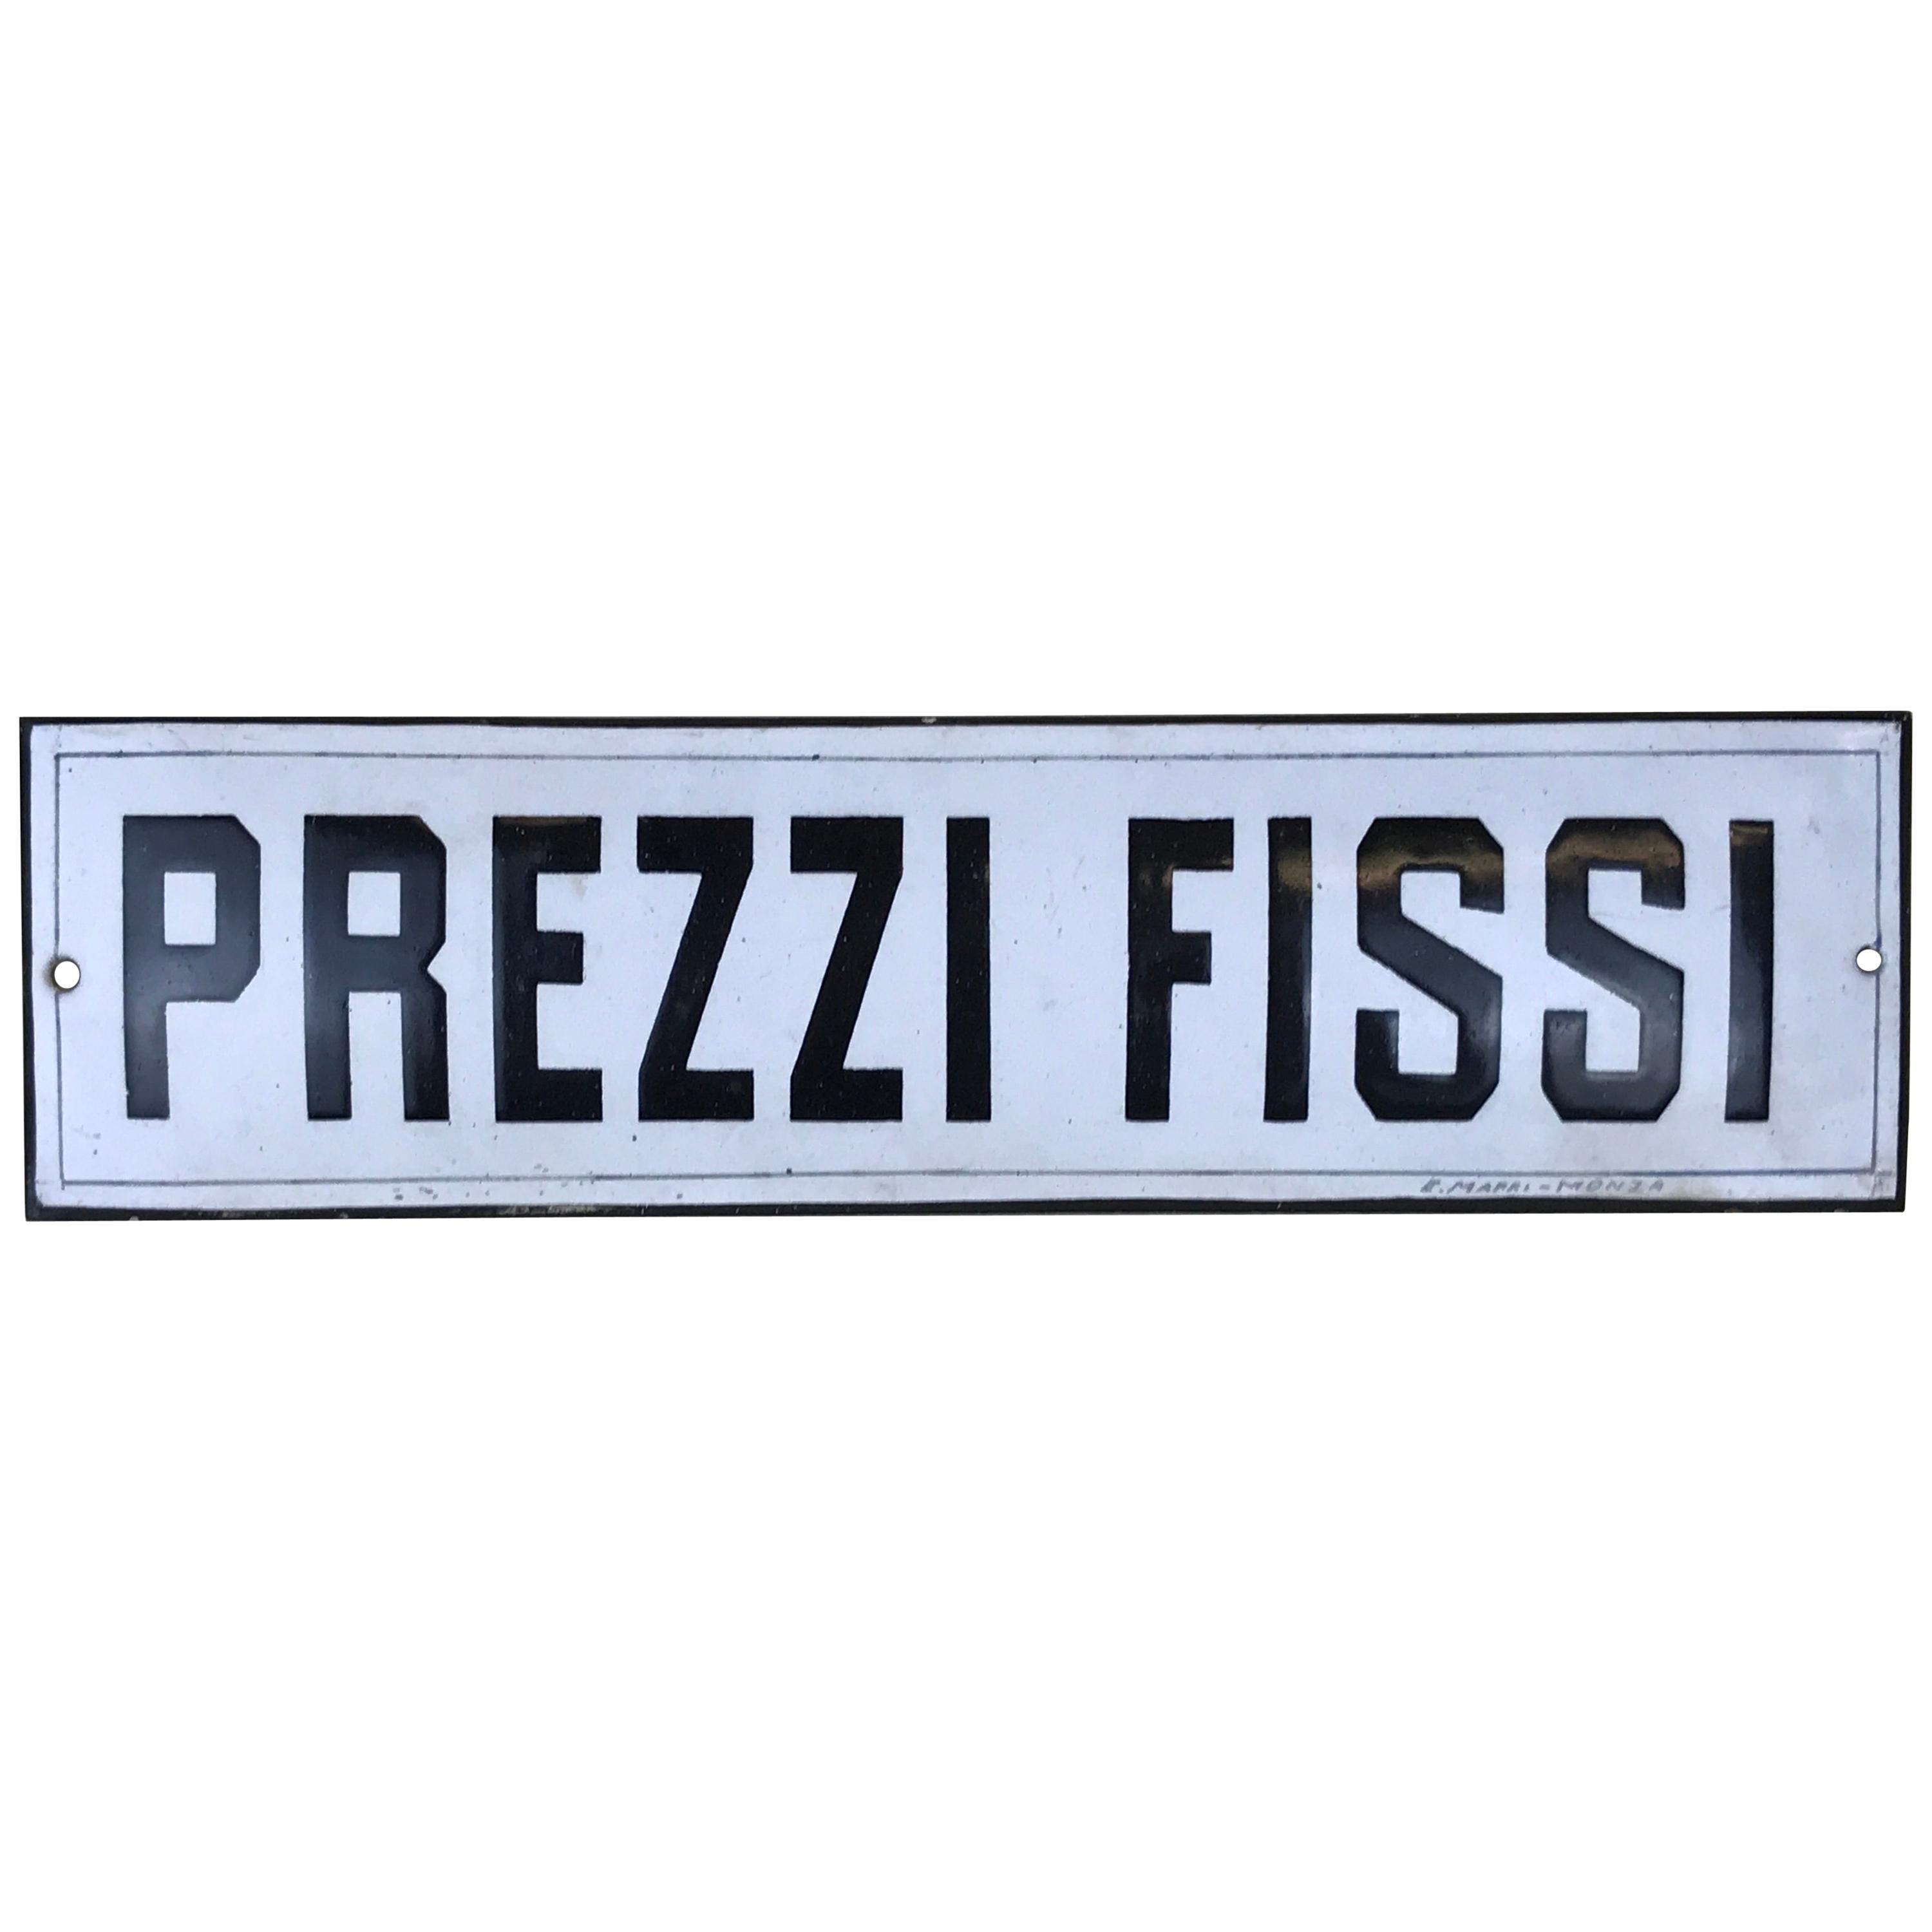 1930s Italian Vintage Very Curved Enamel Metal Fixed Prices Sign, "Prezzi Fissi" For Sale